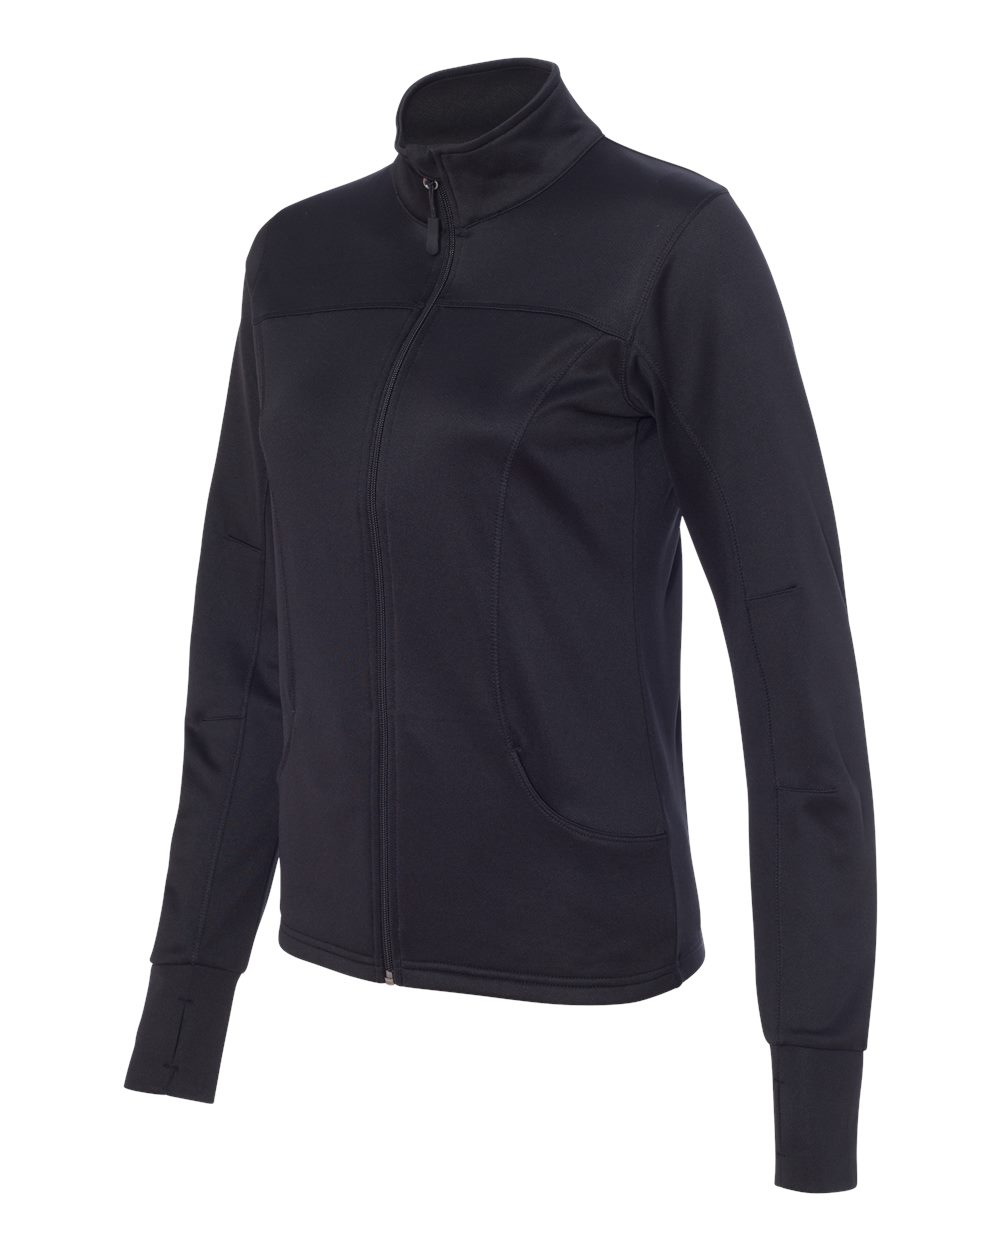 Independent Trading Co. EXP60PAZ - Women's Poly-Tech Full-Zip Track Jacket